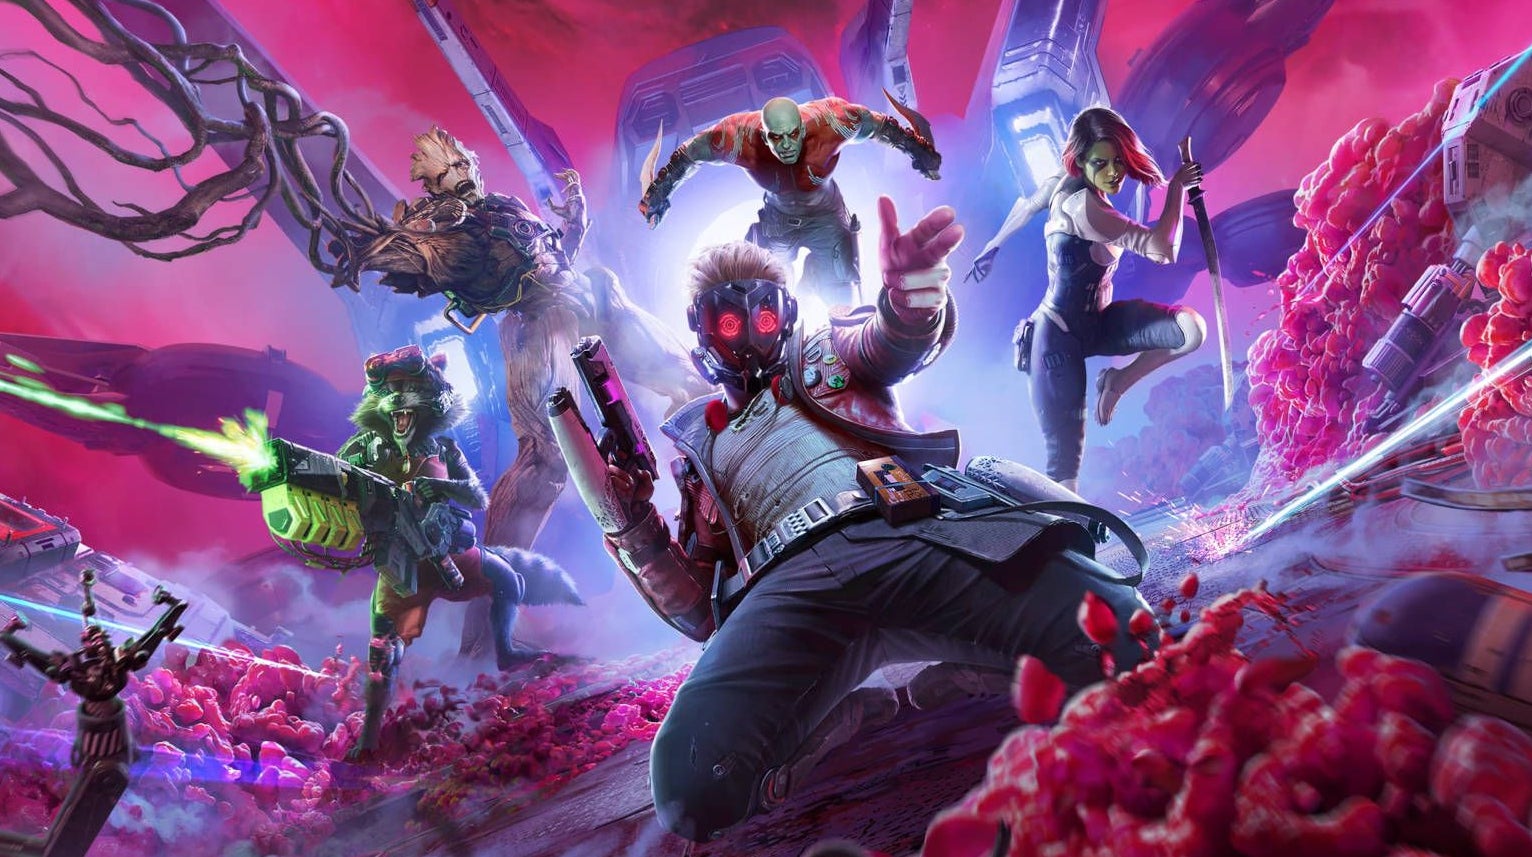 Image for Marvel's Guardians of the Galaxy "undershot our initial expectations", says Square Enix